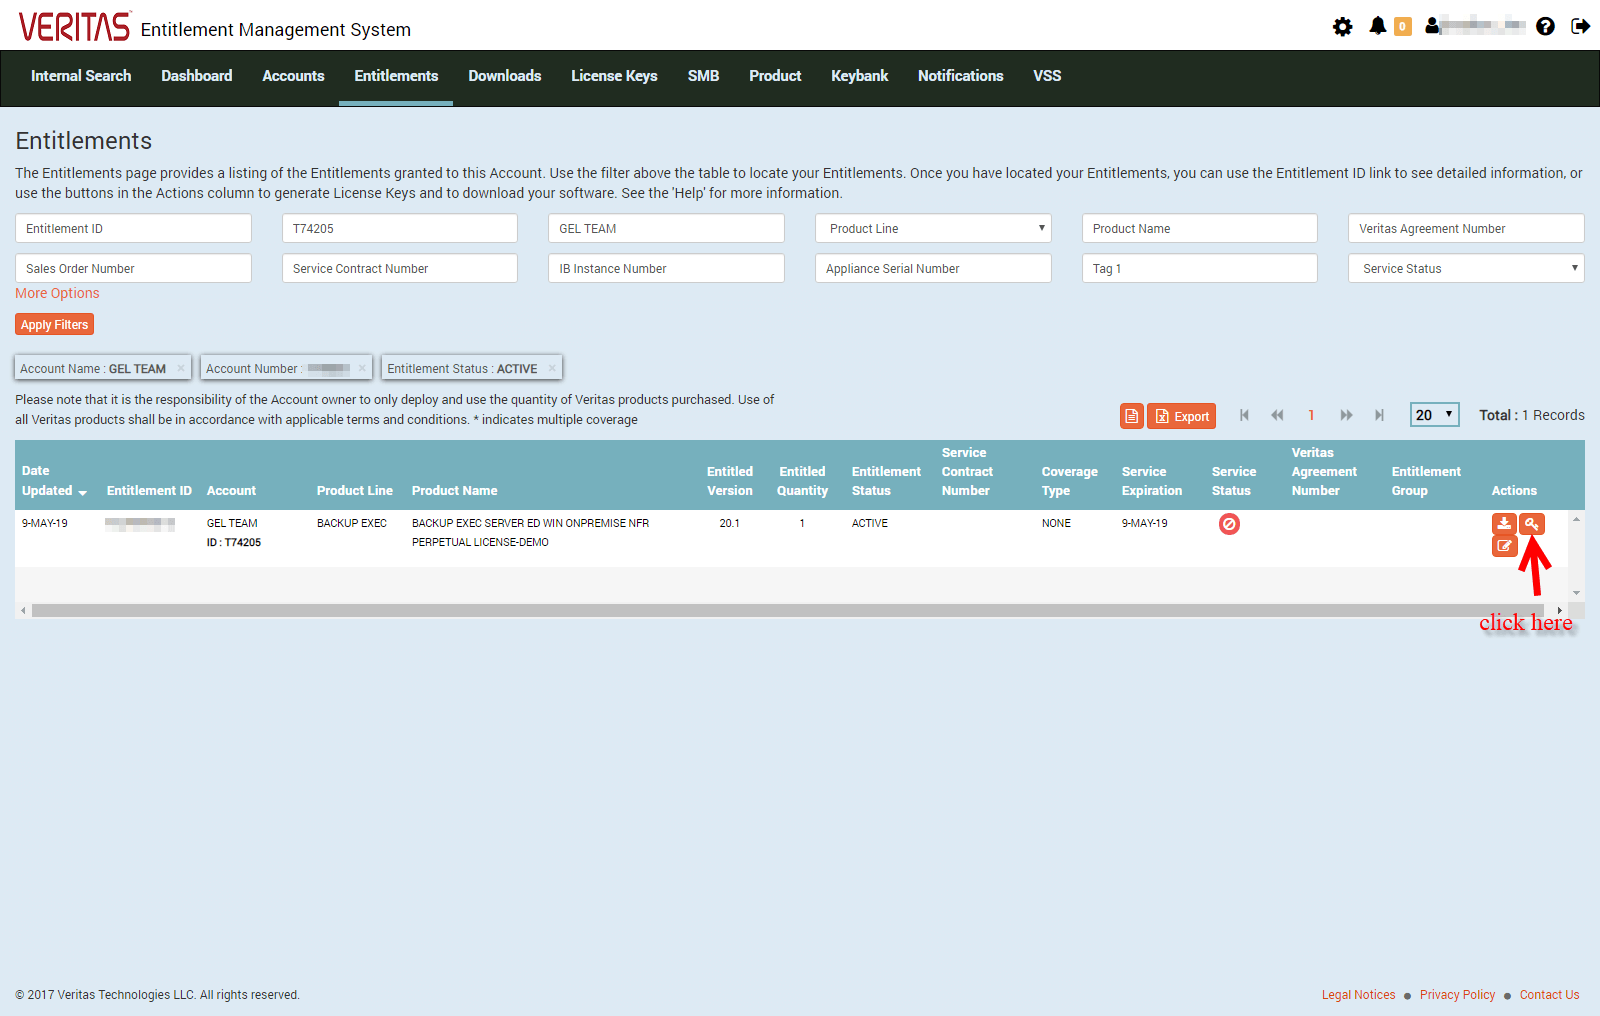 find backup exec in the list of entitlements and click the key icon under the actions column on the right side of the page.